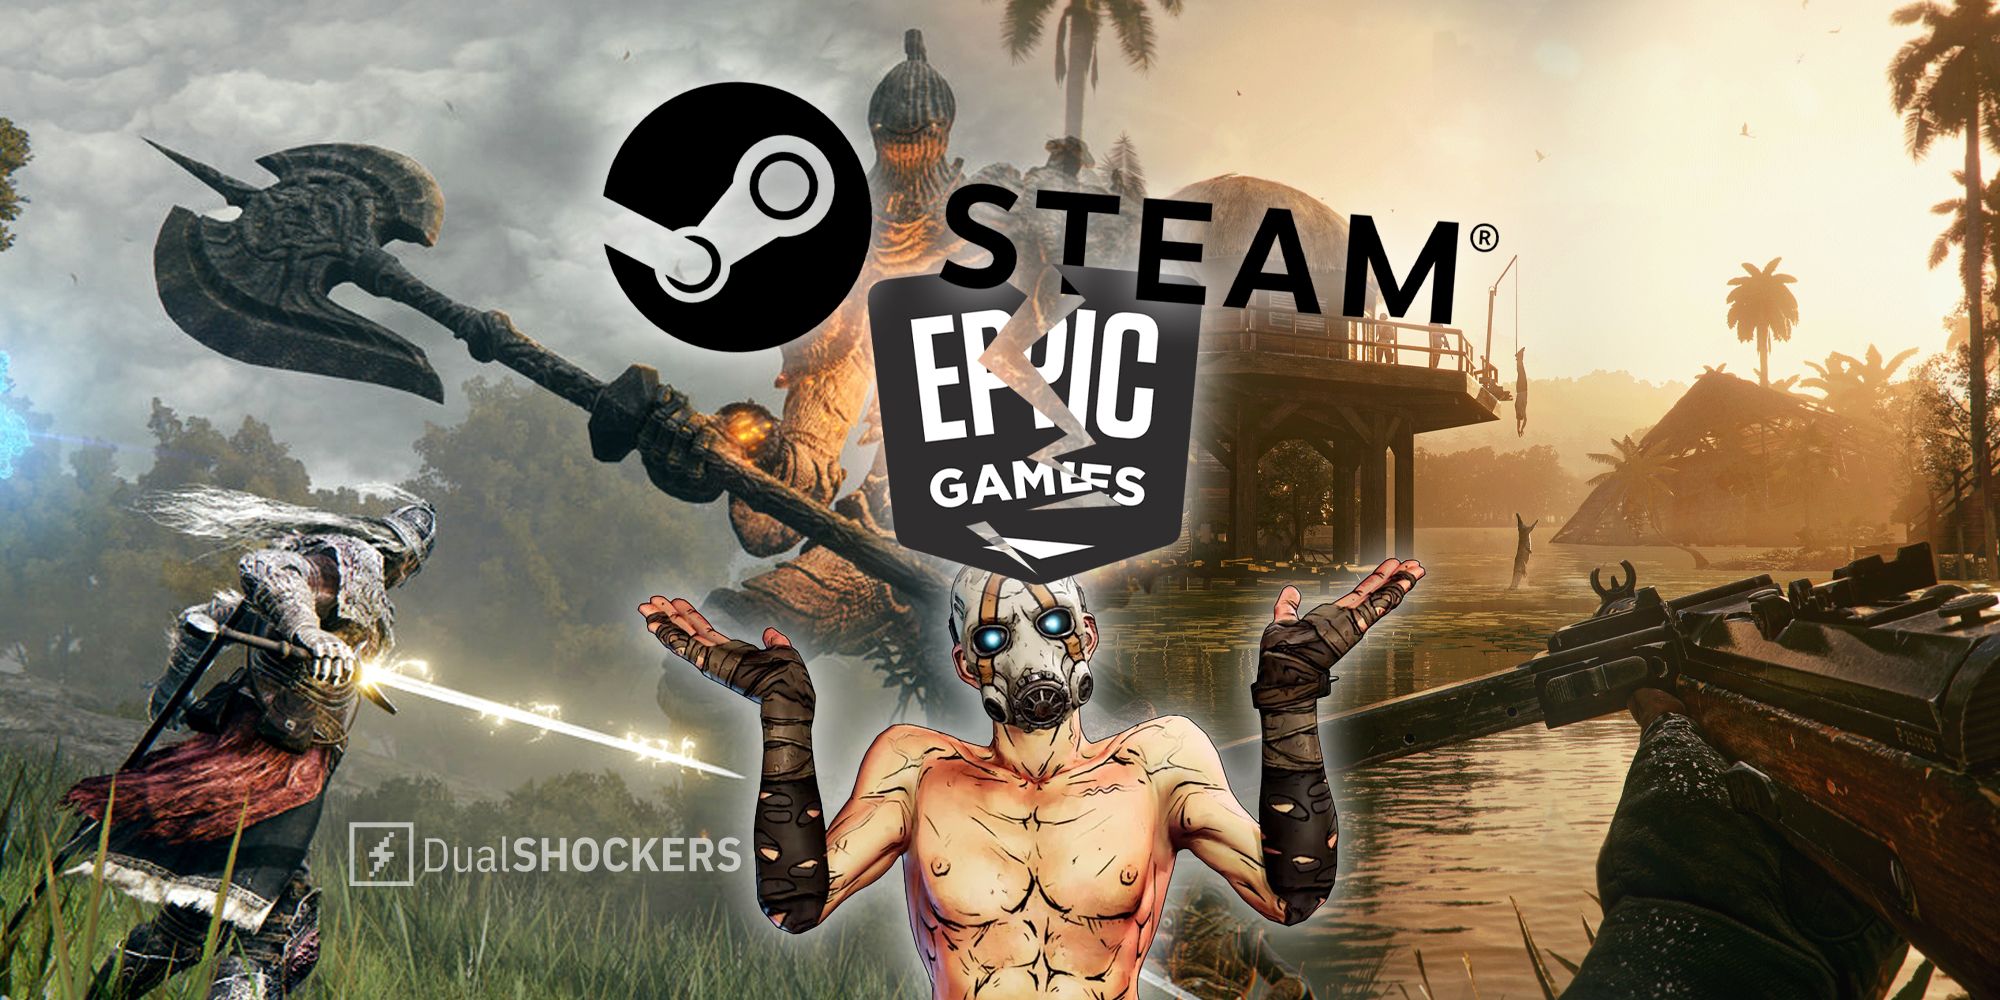 Epic Games and Steam with Borderlands 3, Elden Ring, and Far Cry 6 gameplay